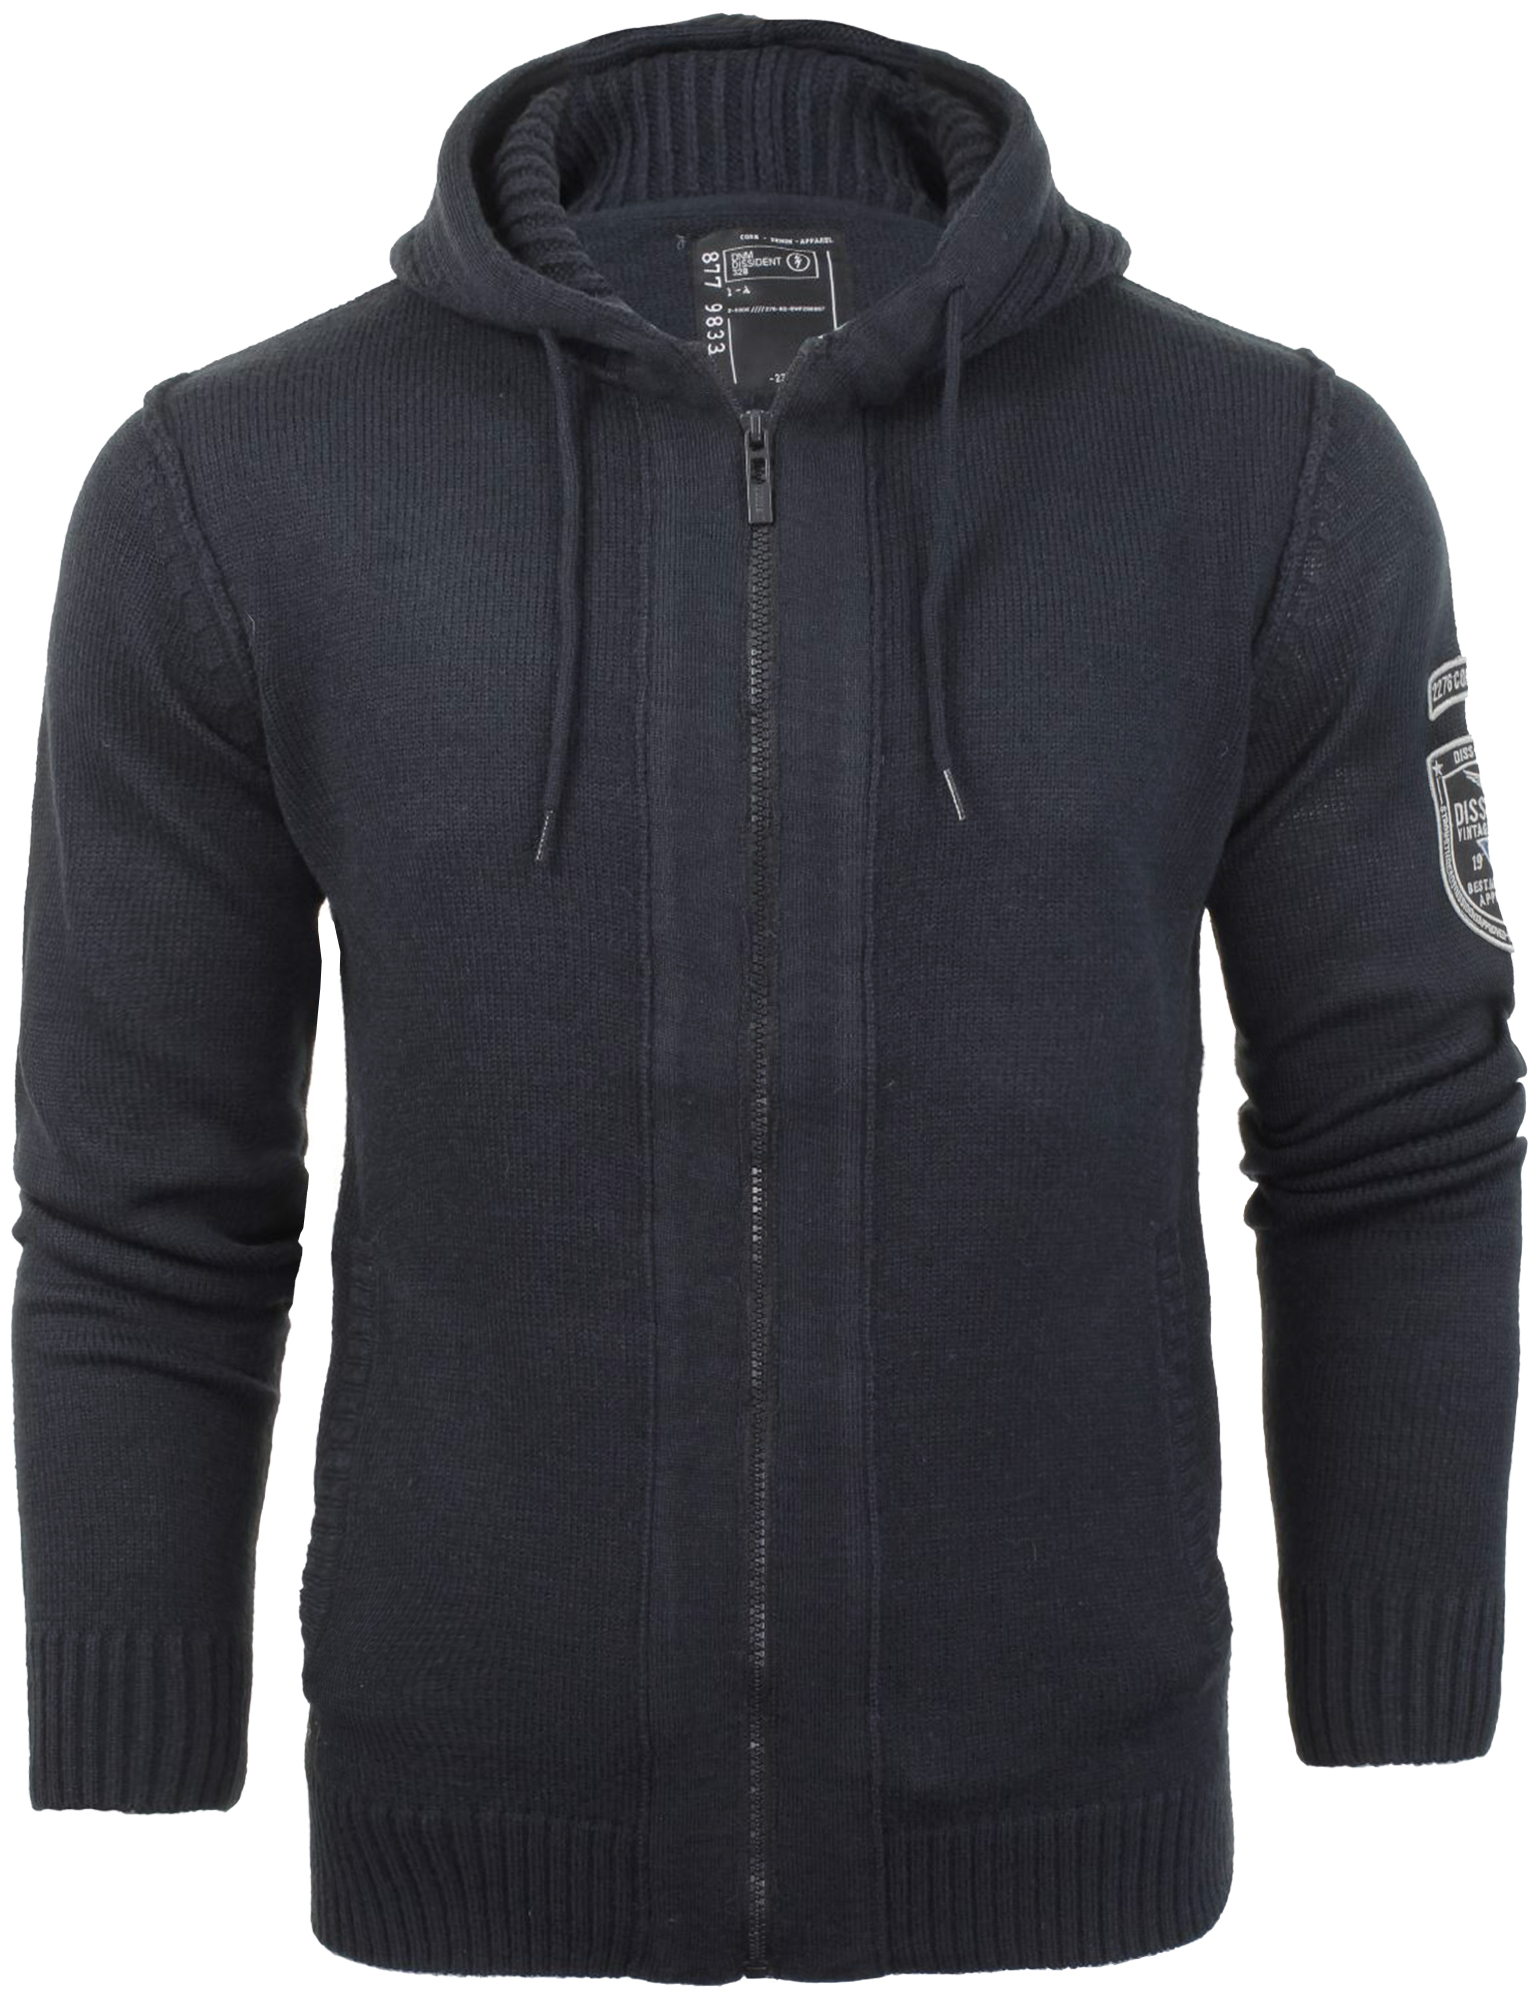 Mens Dissident Cruise Zip Up Hooded Sweater Hoodie Knitted Cardigan ...